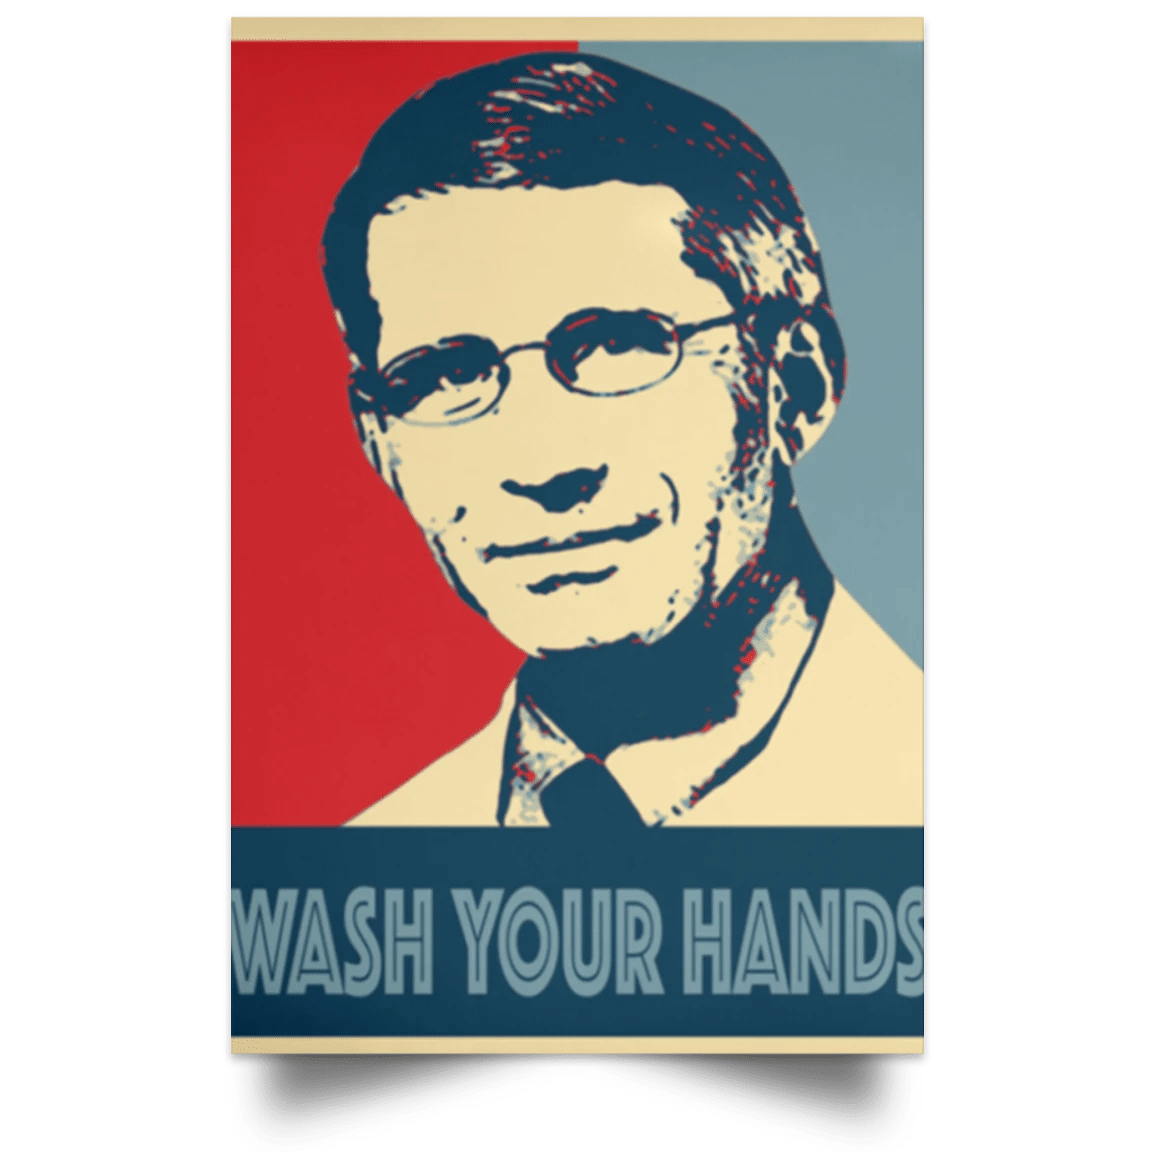 Fauci Wash Your Hand Poster Artistic Anthony Fauci Portrait Poster Christmas Wall Decoration